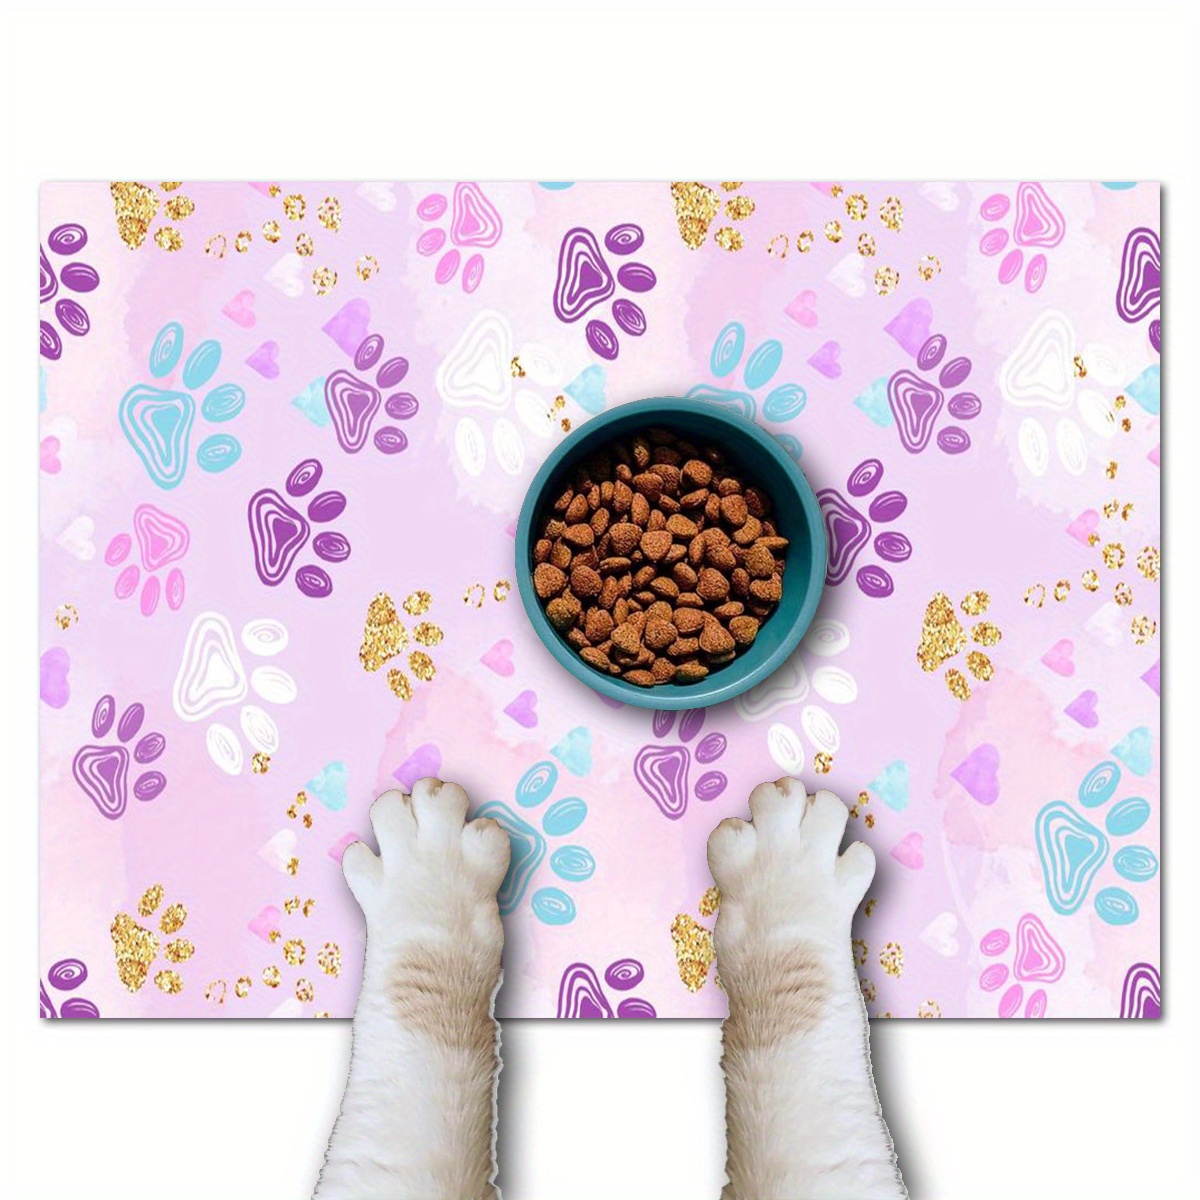 

1pc Cute Paw Print Pet Feeding Mat - Non-slip, Quick-dry & Stain-resistant For Cats And Dogs - Ideal For Food & Water Bowls Pet Food Mat Puppy Pads Washable